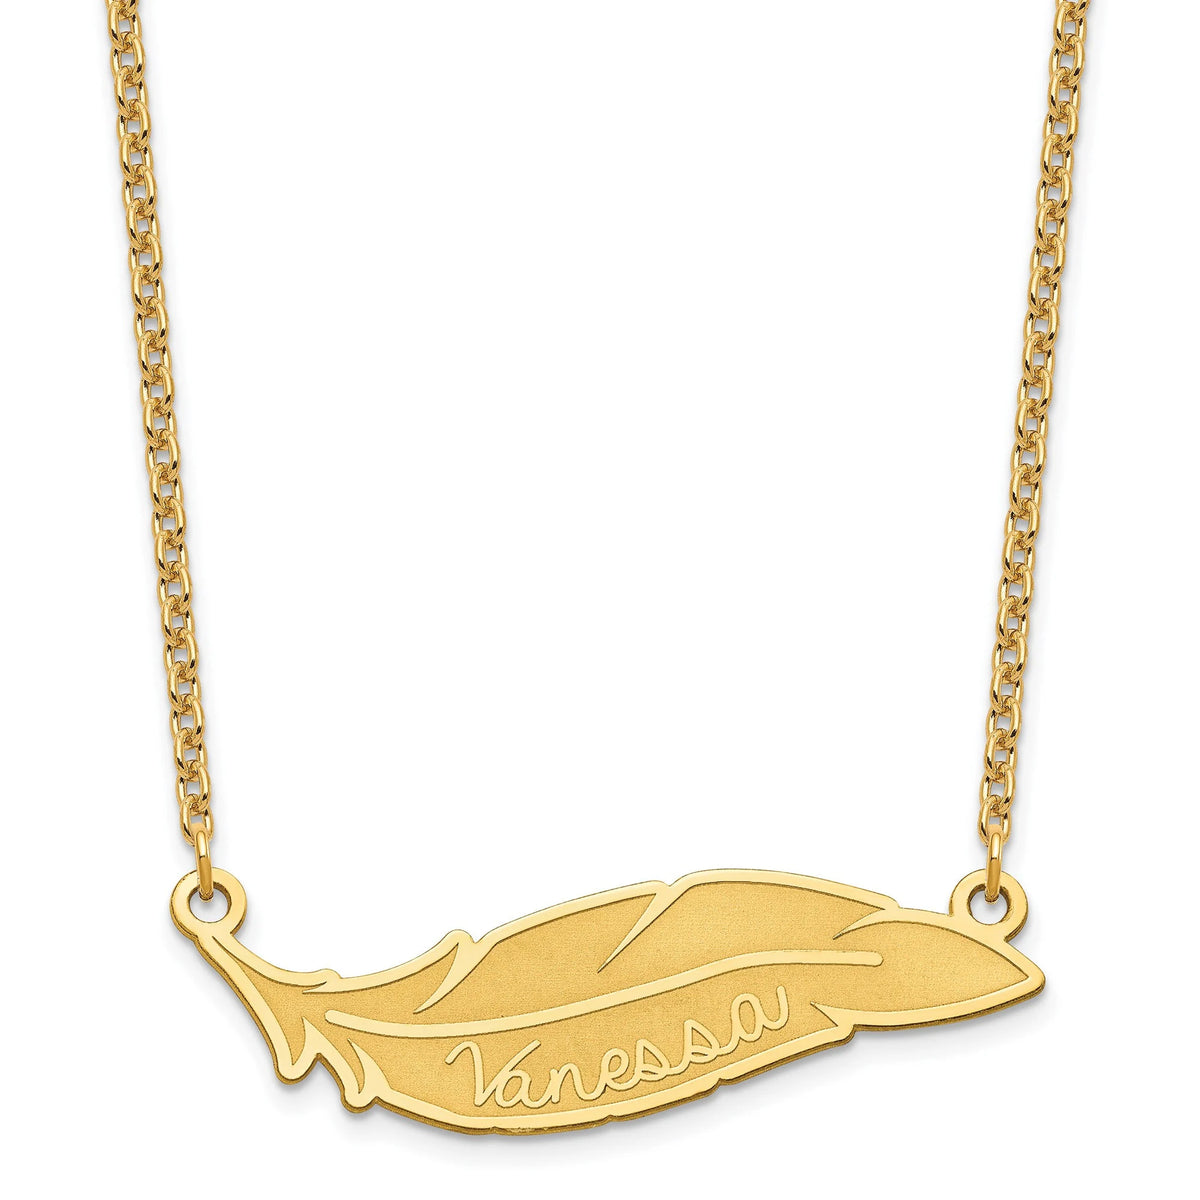 Personalized Feather Name Necklace in Sterling Silver, 10k, or 14k Gold Chain  (1.55 inches wide) Gift Box Included Made in USA